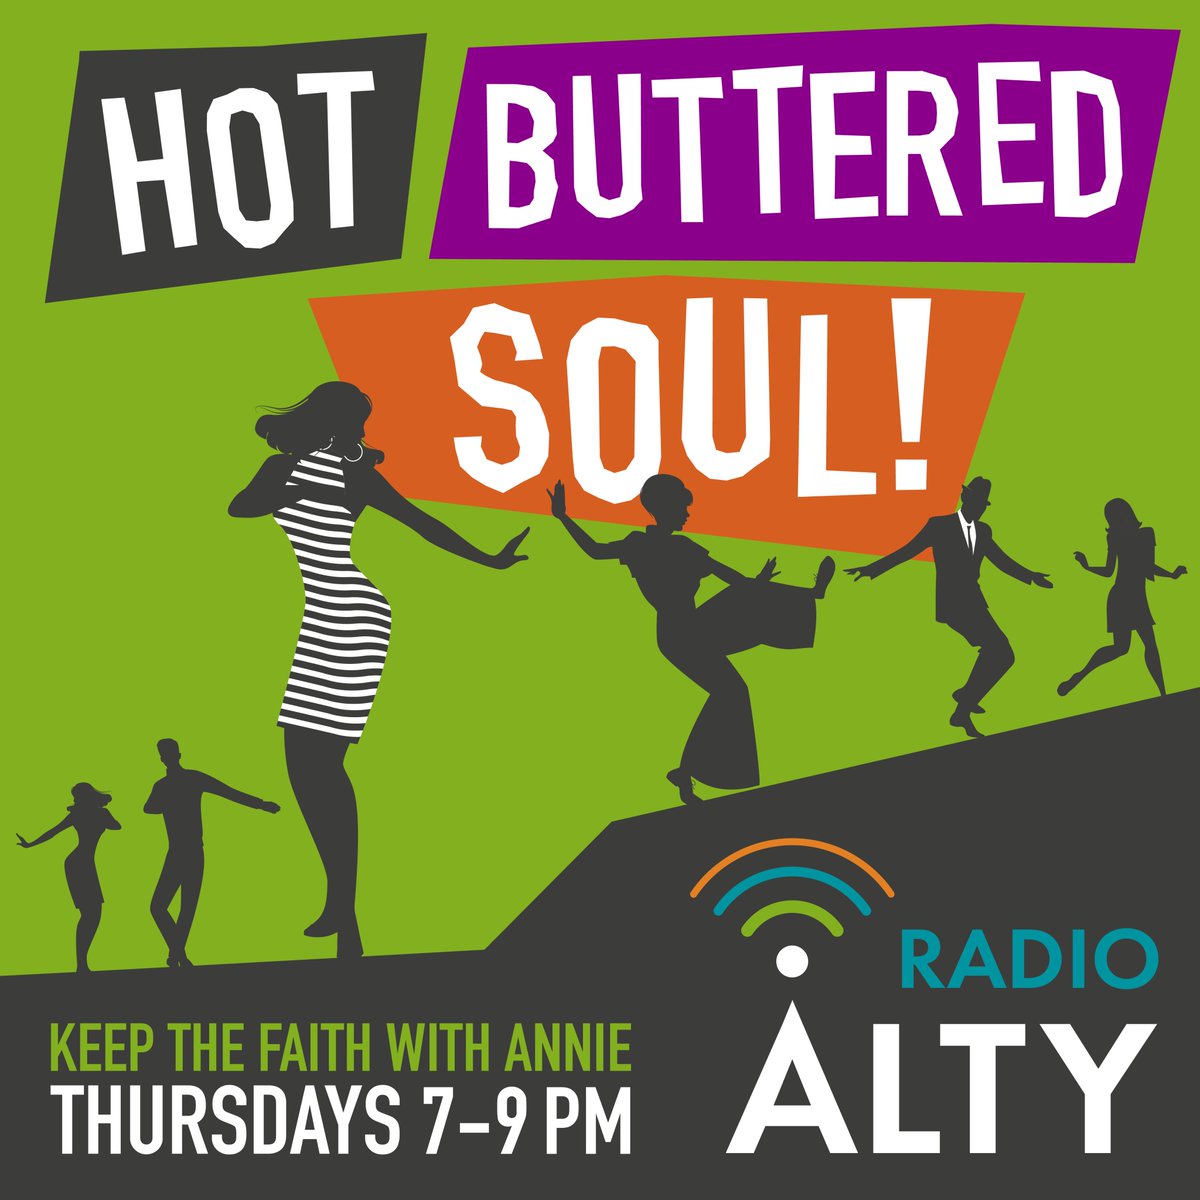 Annie is standing by from 7pm to provide you a 2-hour helping of #HotButteredSoul. Featured artists tonight include Dee Dee Sharp, The Spellbinders, Grover Mitchell, Edwin Starr, The Supremes, The Mob, Betty Everett, The Drifters and many more!